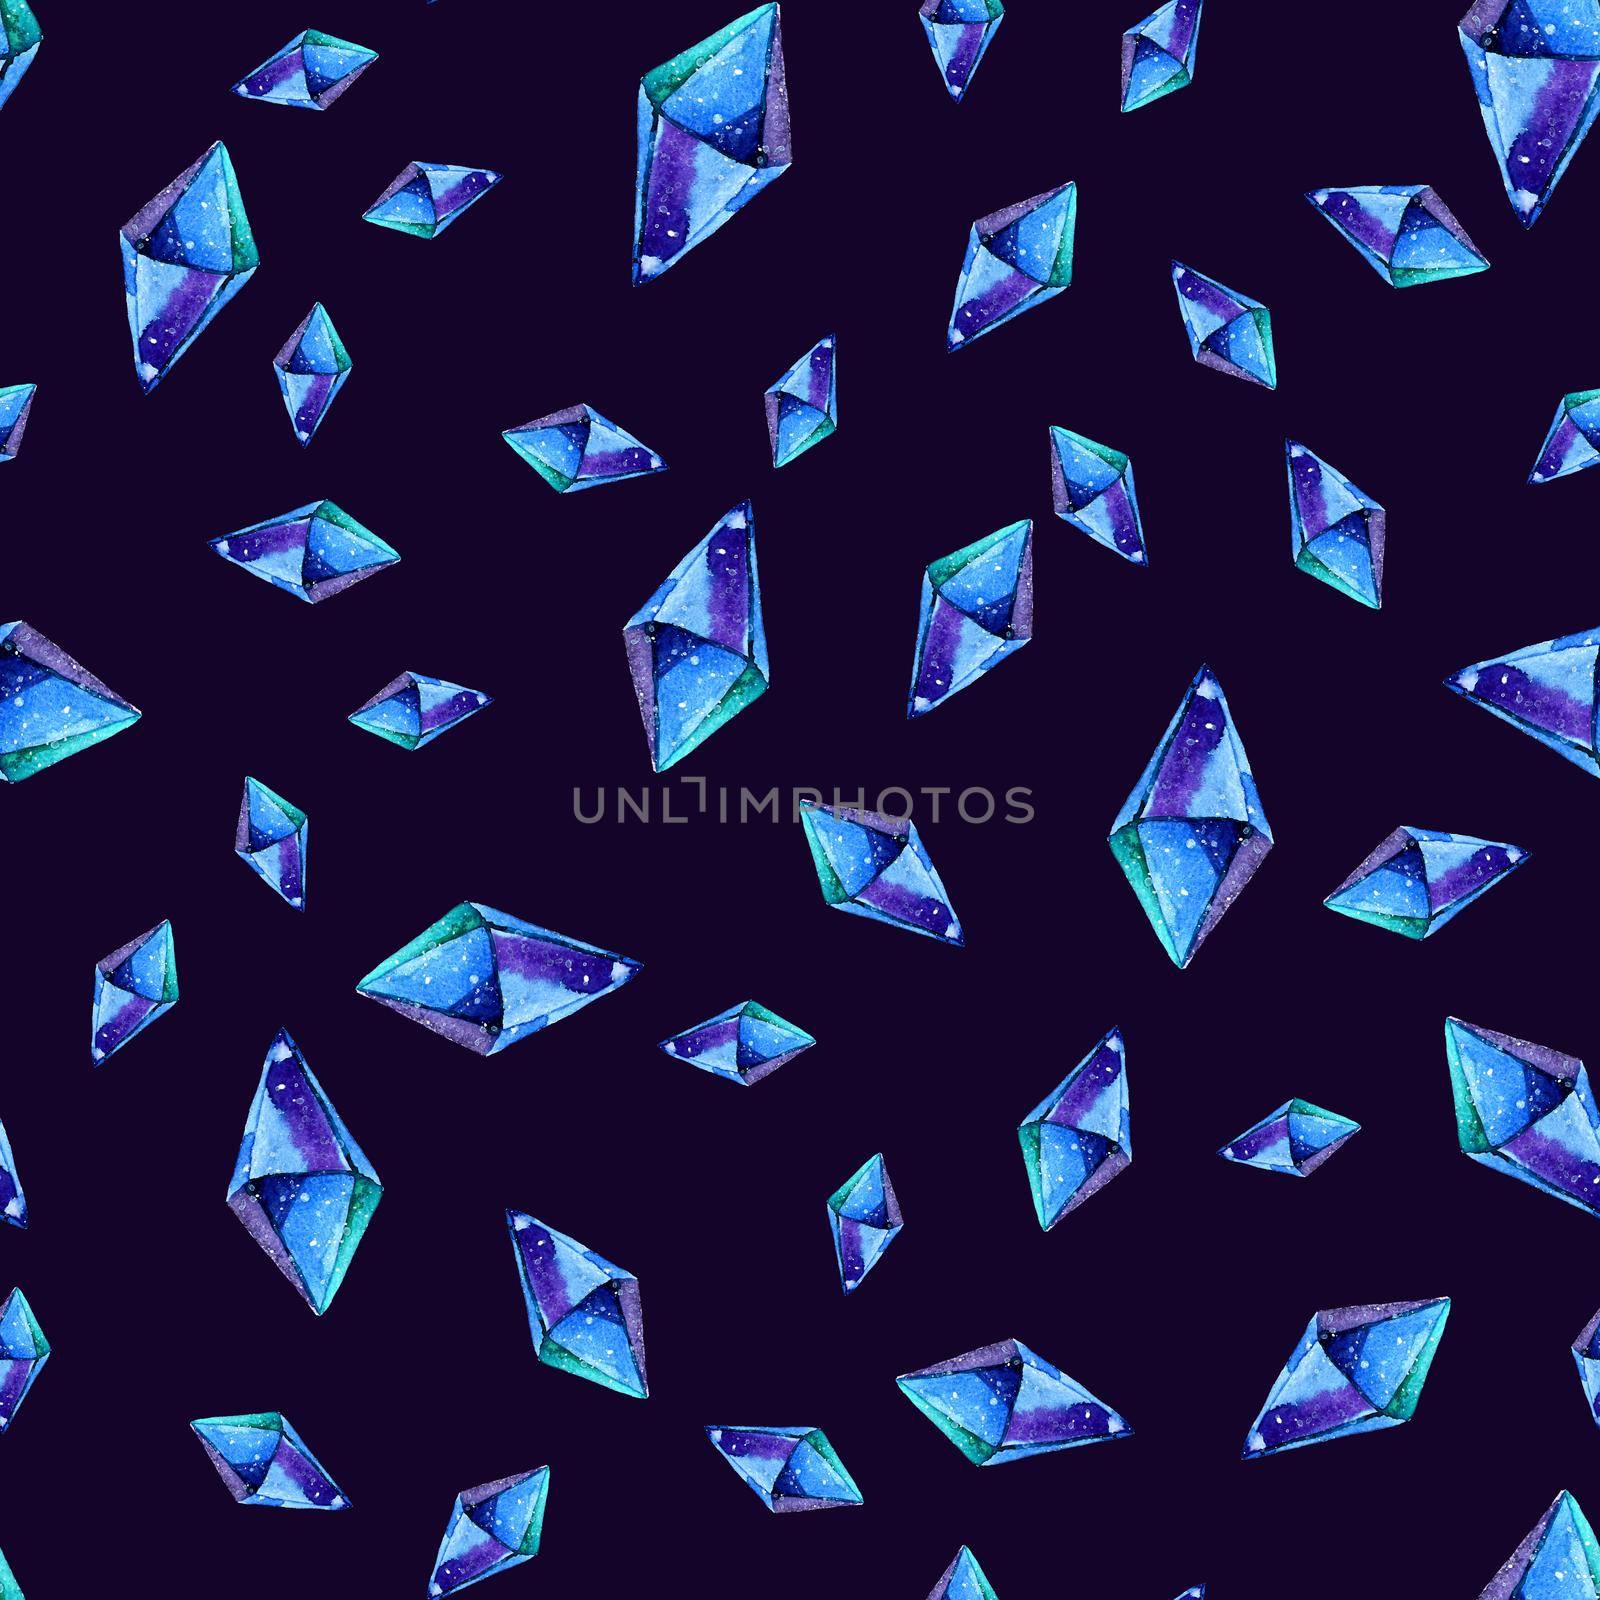 Watercolor illustration of diamond crystals - seamless pattern. Print for textile, fabric, wallpaper. Hand made painting. Jewel on dark background. Unusual modern ornate design. by DesignAB